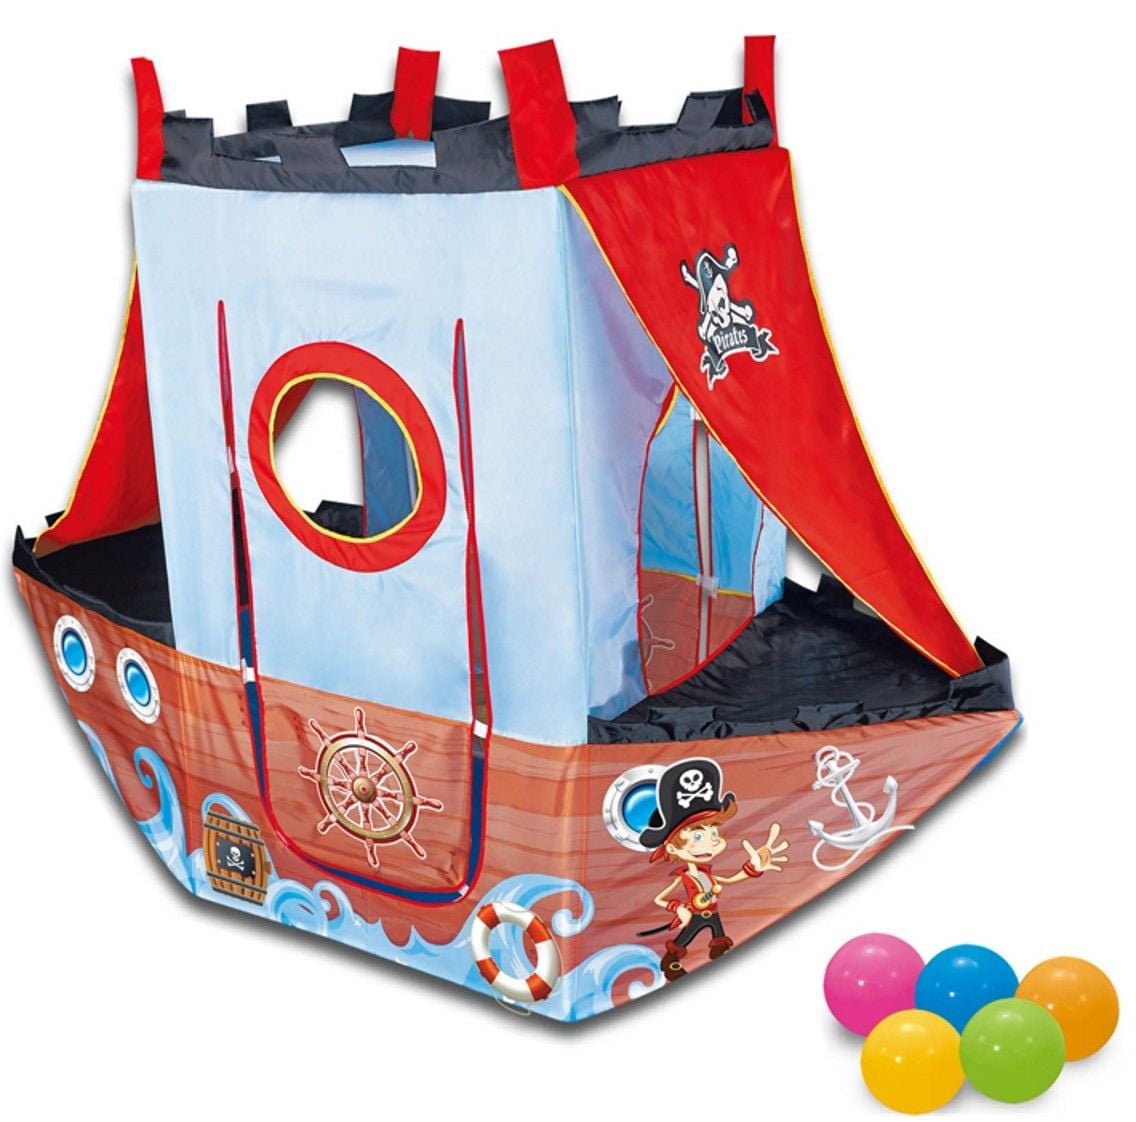 Girls Boys Pirate Themed Play Tent for Kids Children Indoor & Outdoor Play 